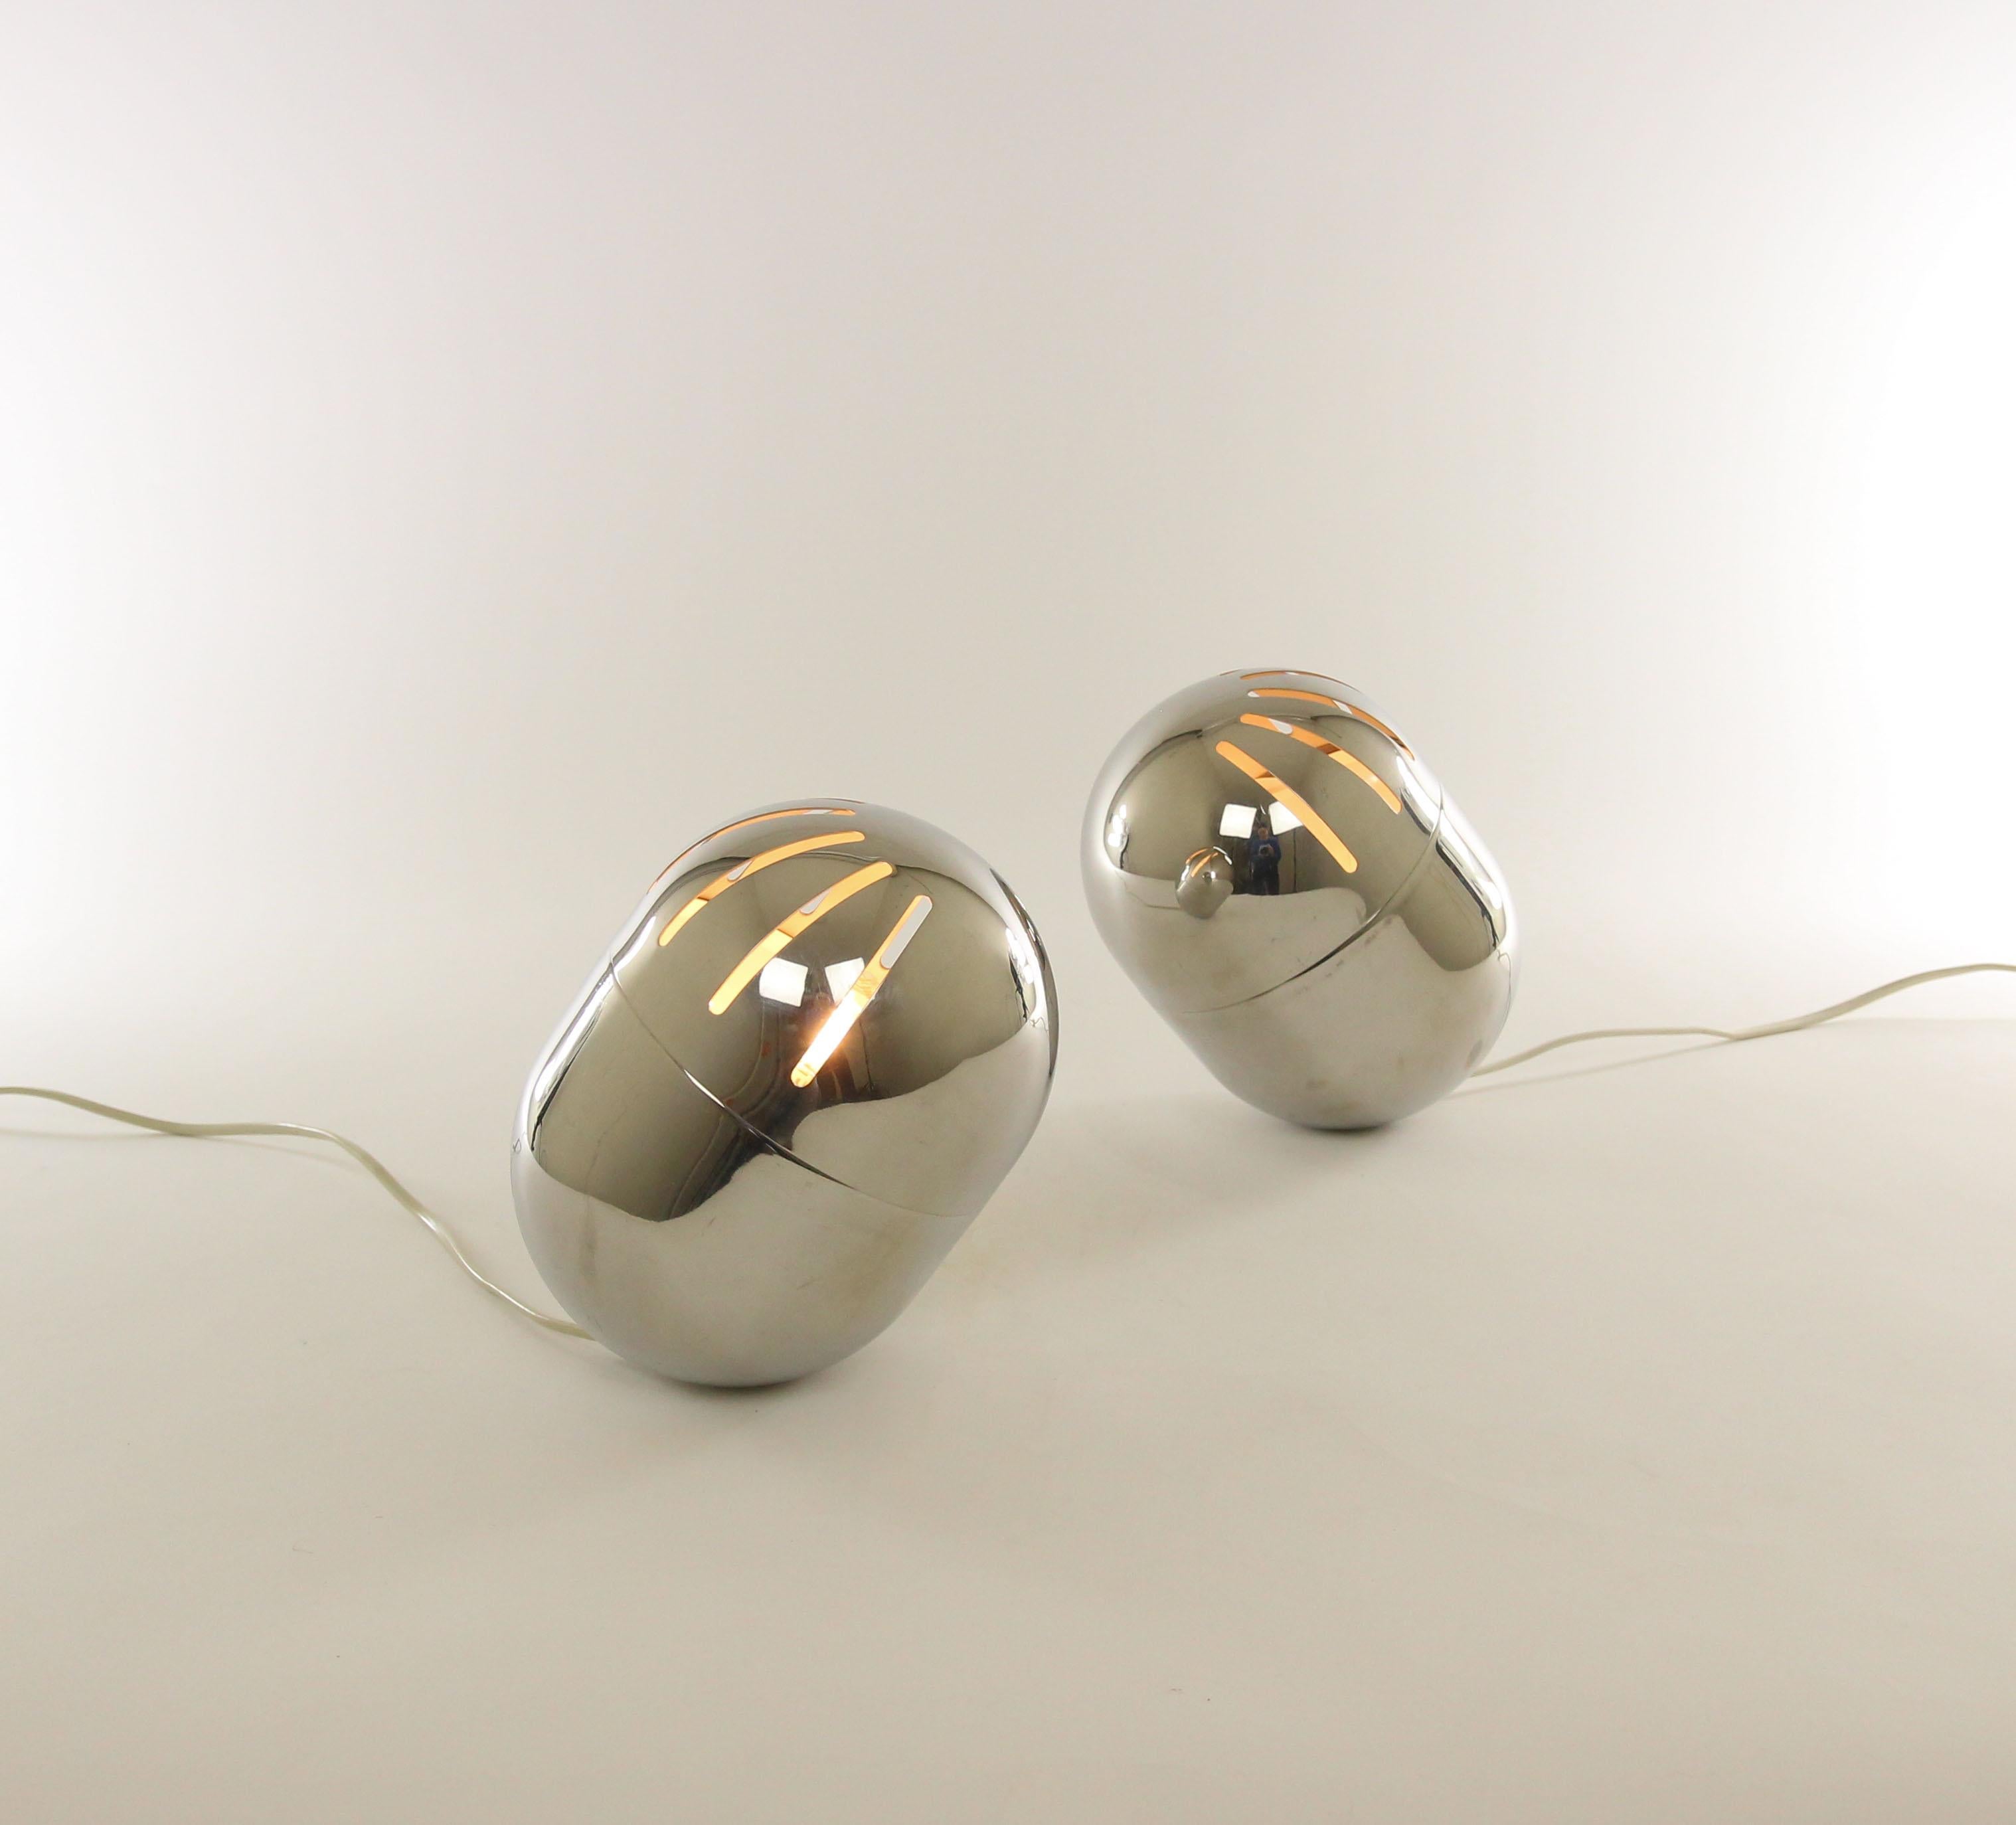 Pair of chromed table lamps produced by Reggiani, probably from the 1970s.

The top part of the lamp, which is rotatable, contains eight elongated openings through which the light emanates in a playful way. The bottom of the lamp is relatively